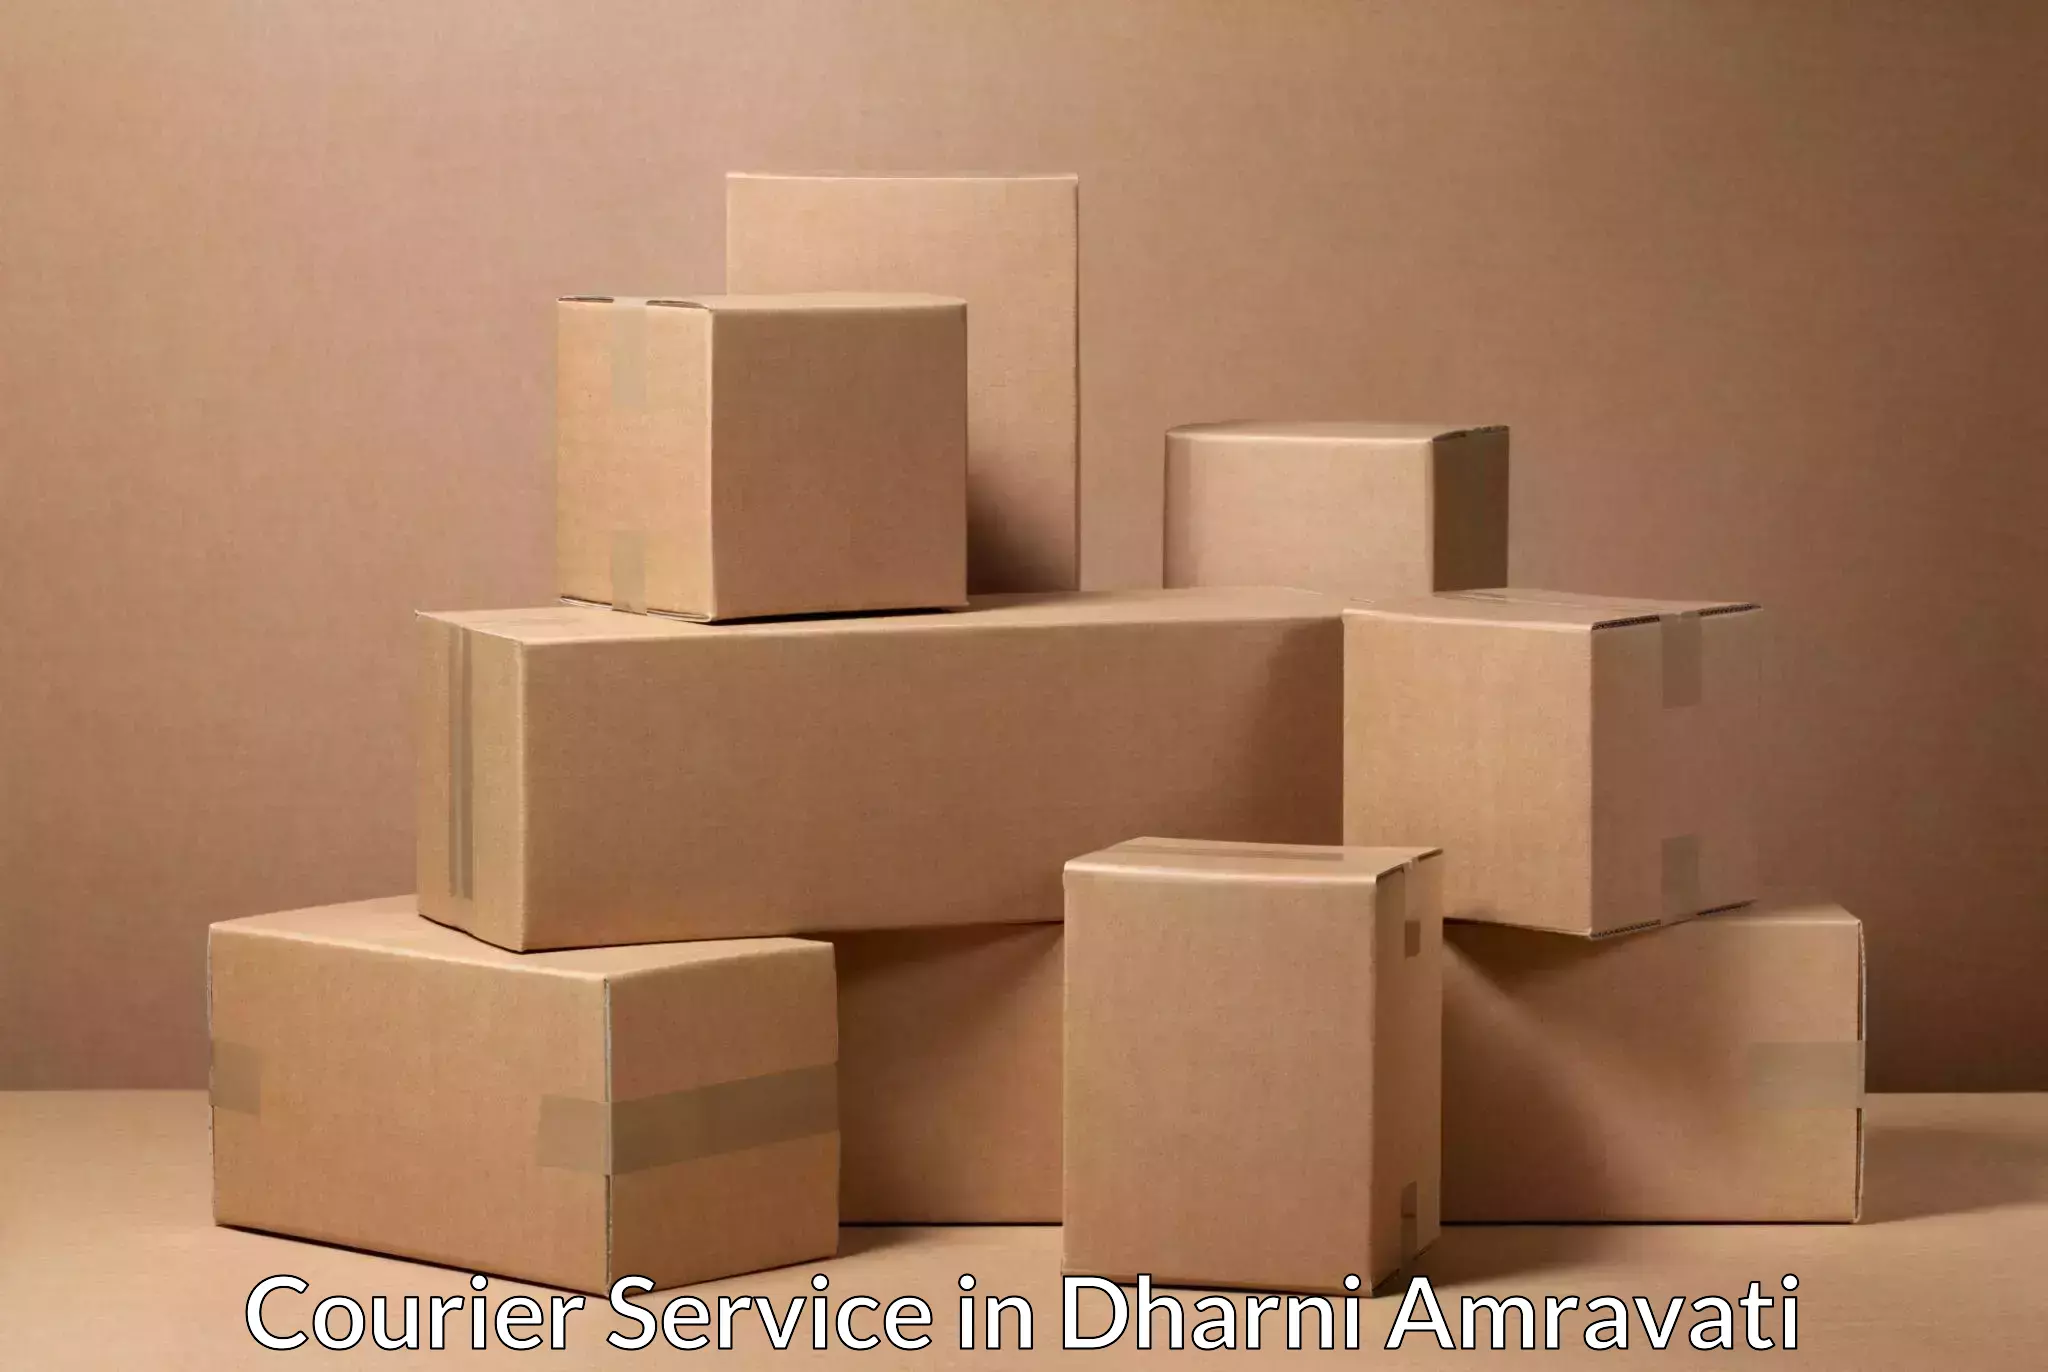 Overnight delivery services in Dharni Amravati